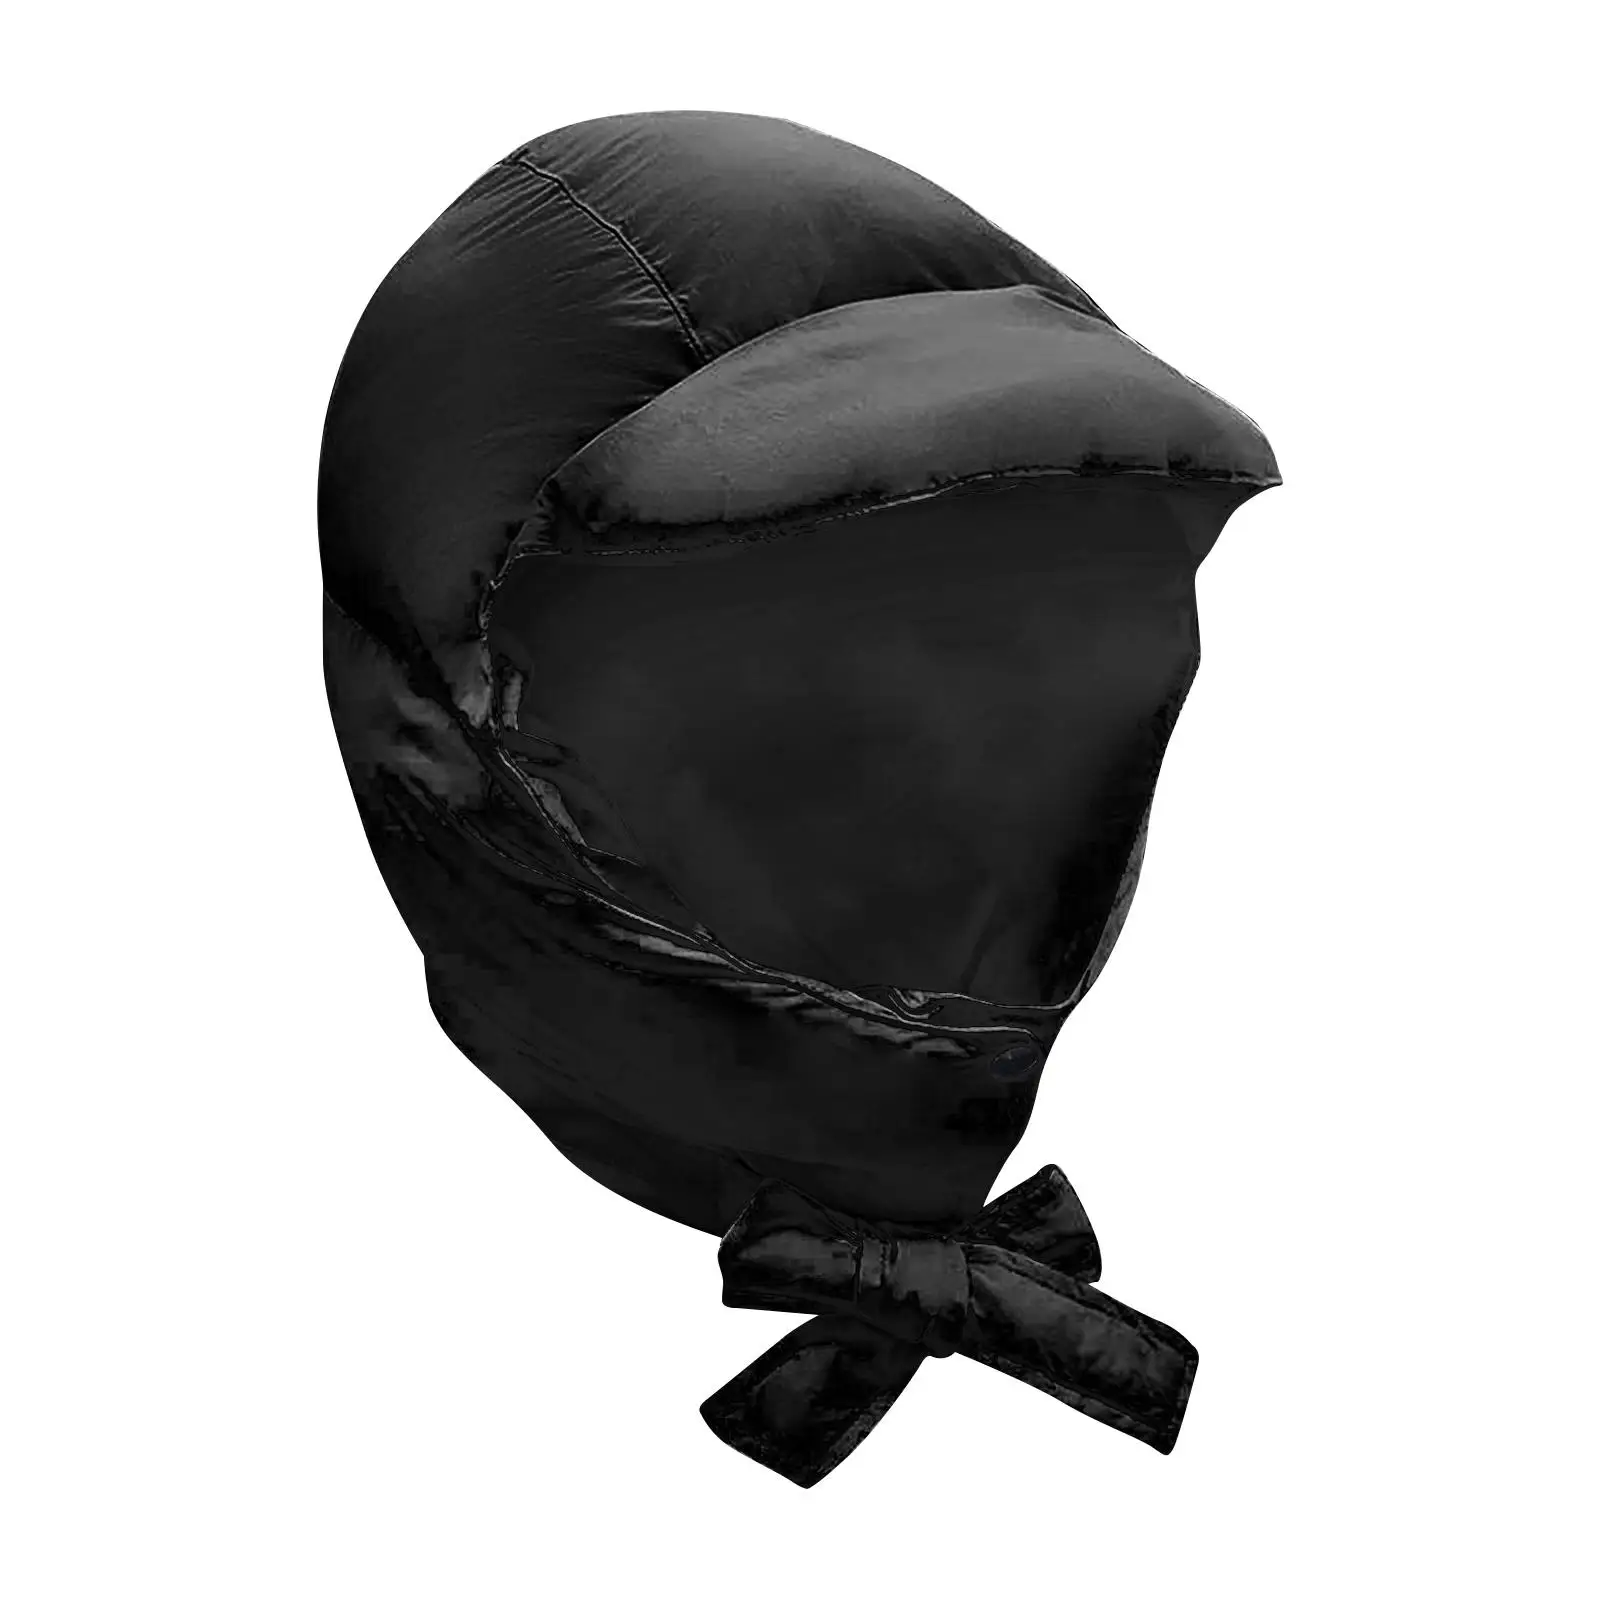 Down Hat with Earflaps Winter Hat Peaked Hat Warm Hat with Visor Down Cap for Camping Biking Snow Sports Motorcycle Hiking